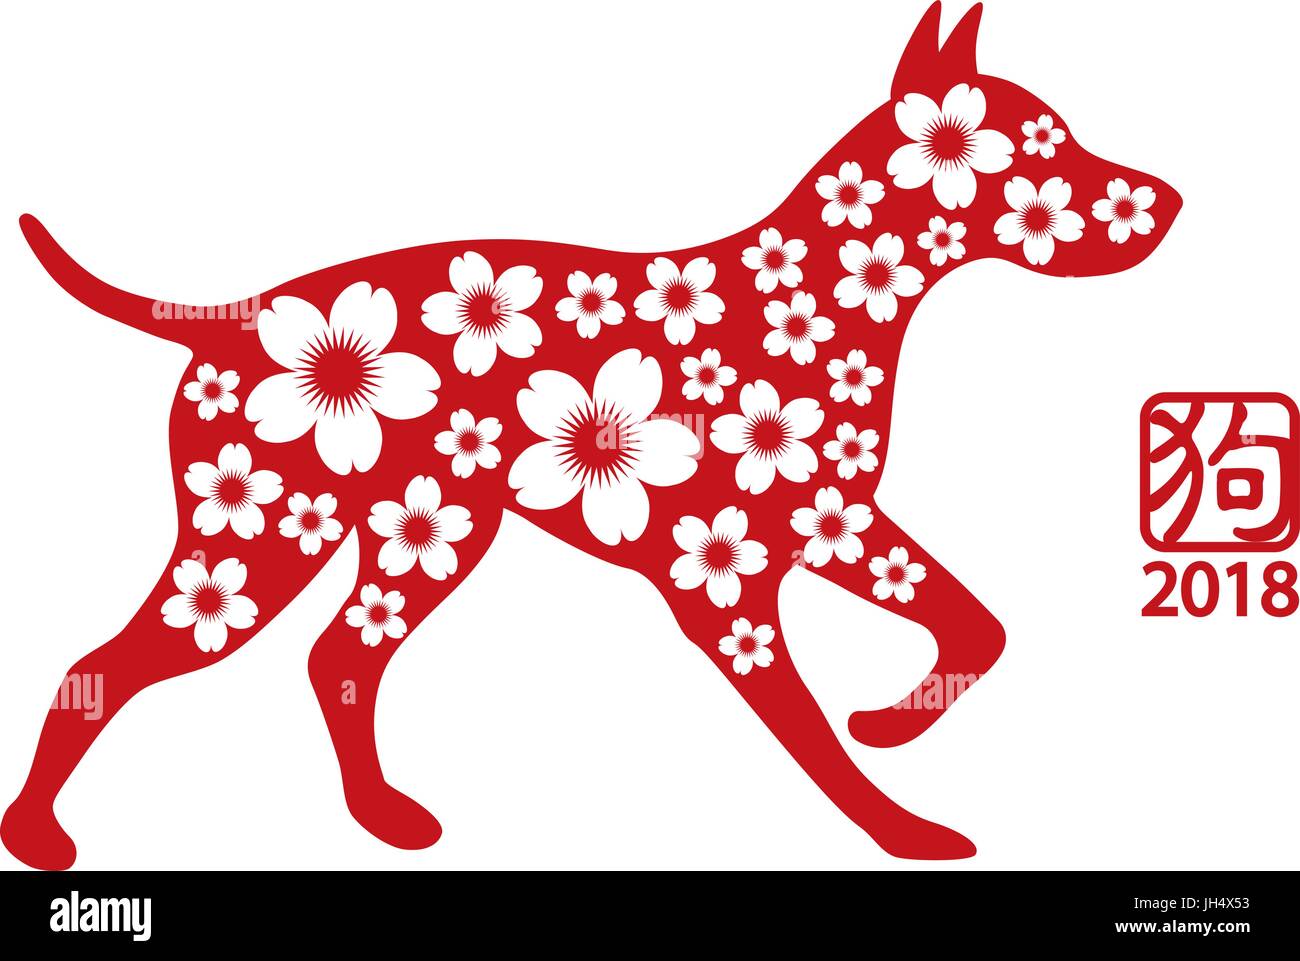 Download Chinese Lunar 2018 New Year of the Dog Silhouette with ...